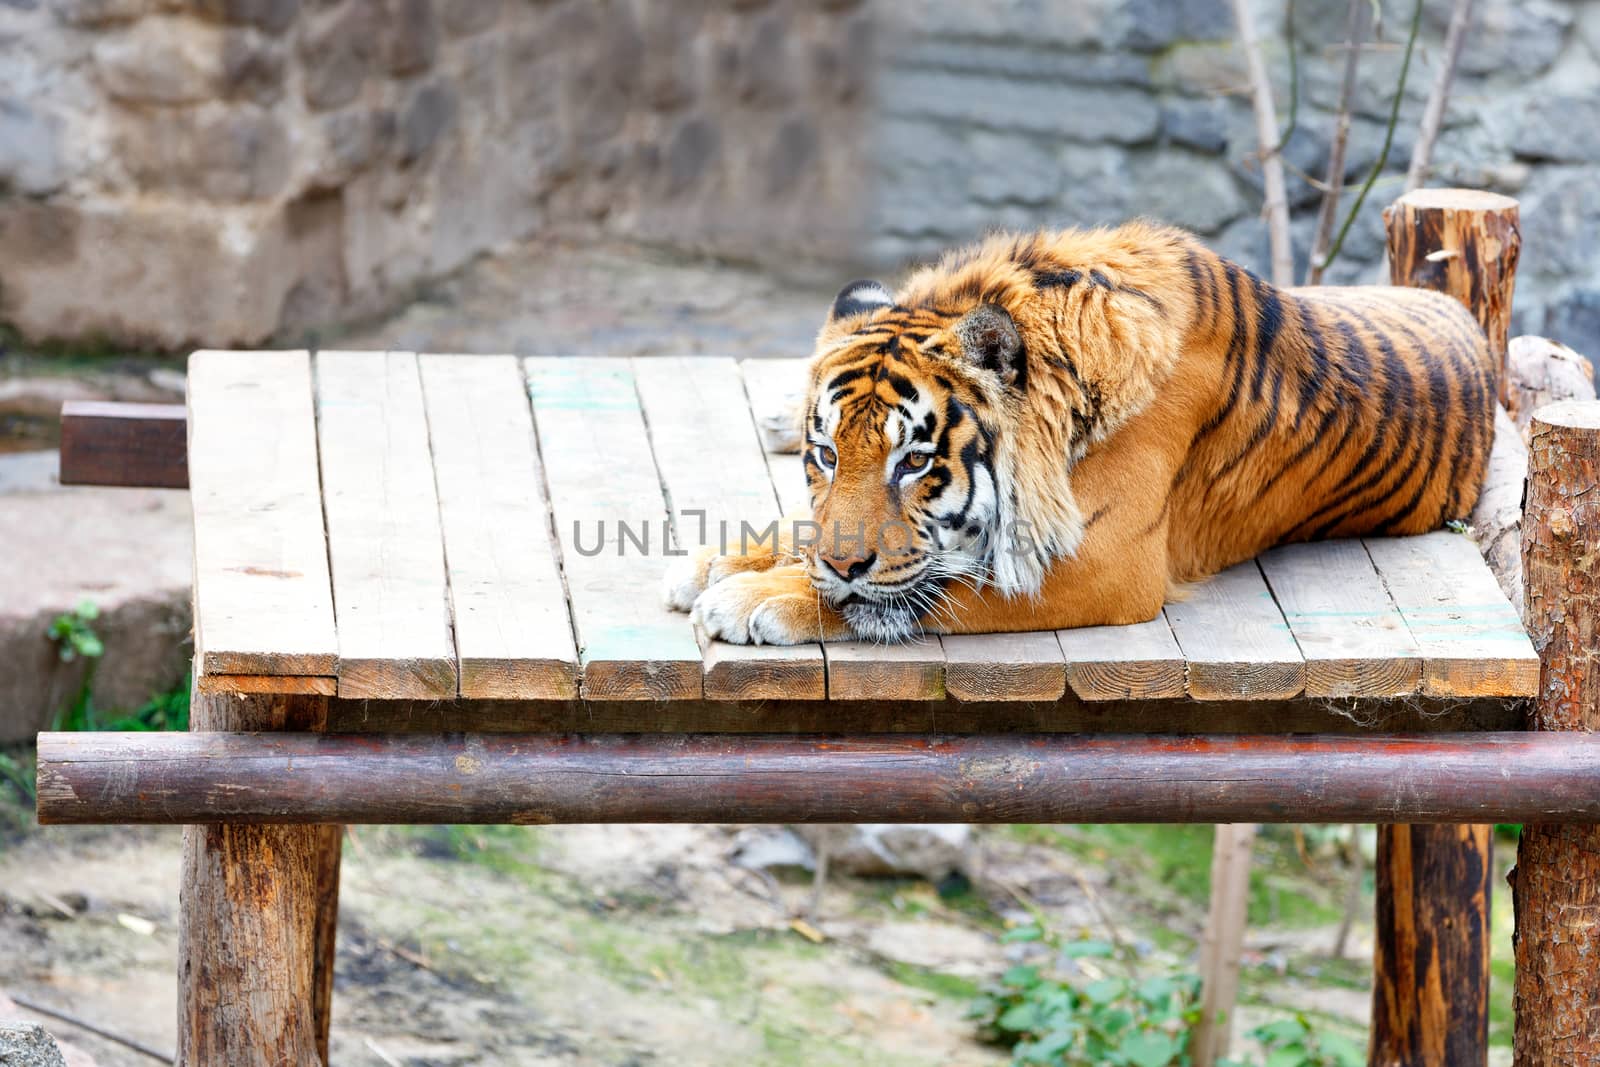 The striped tiger is resting on a wooden platform and basking in the sun. by Sergii